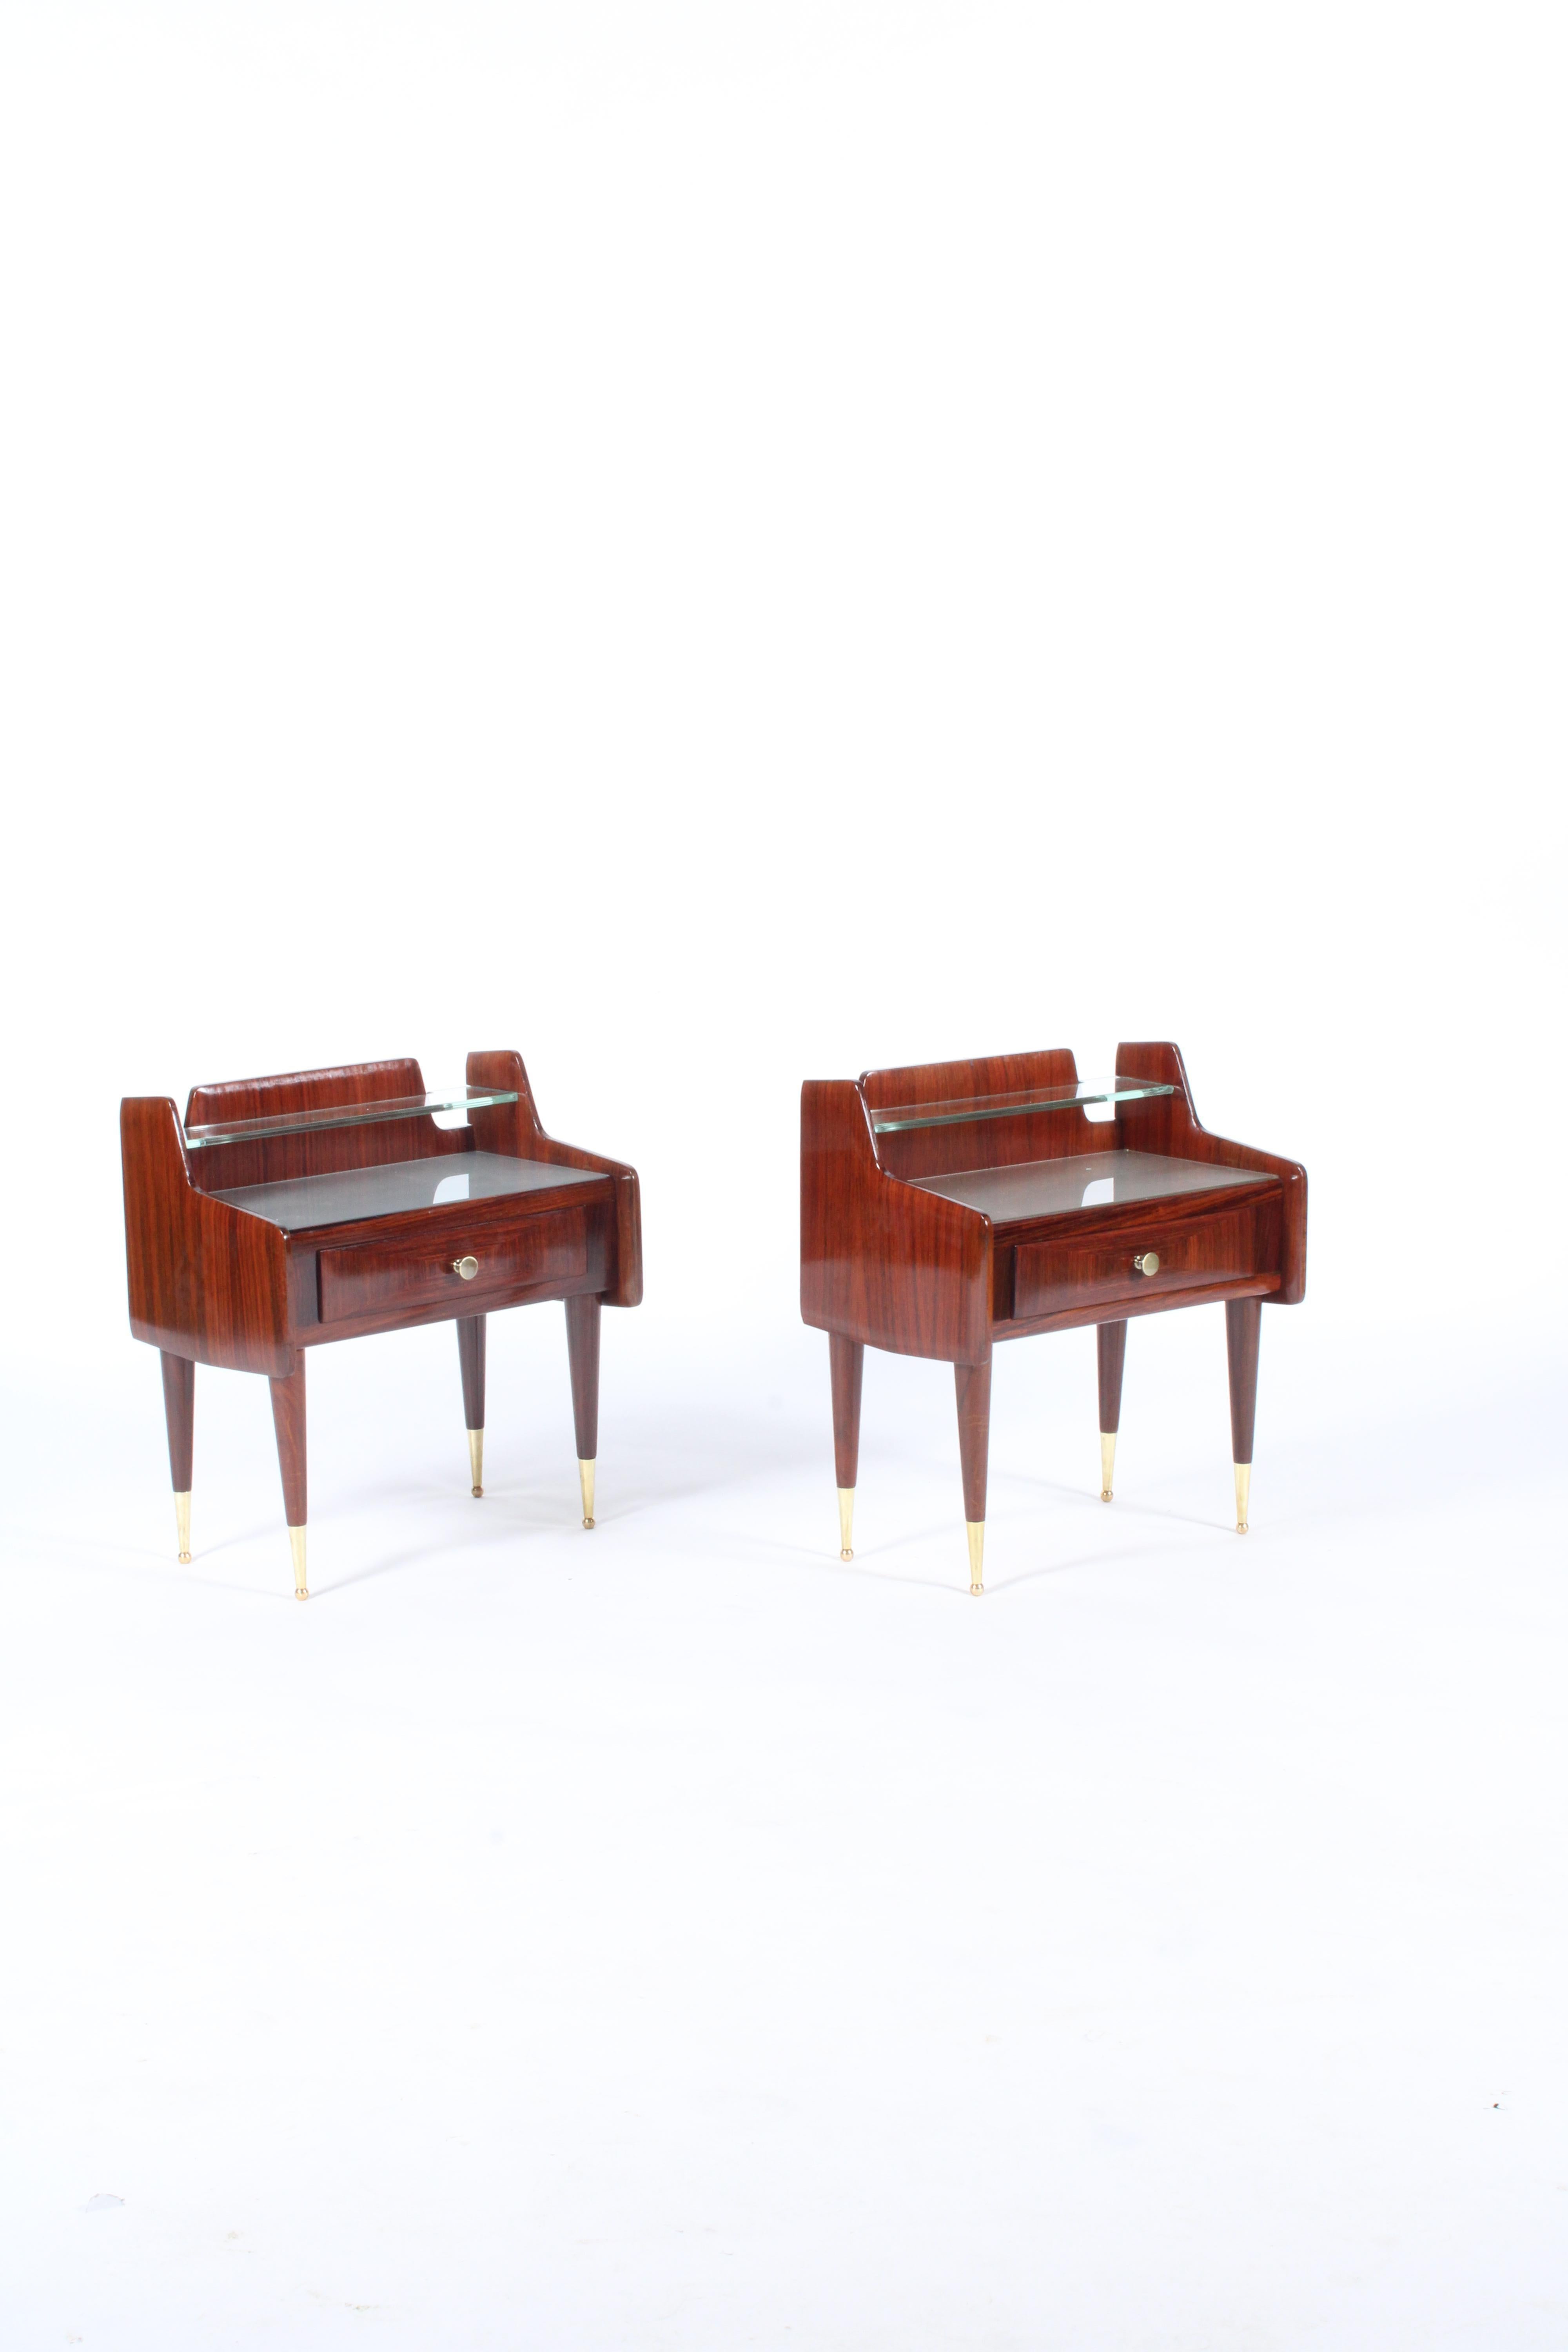 Brass Super Pair Of Two Tier Mid Century Italian Night Stands For Sale